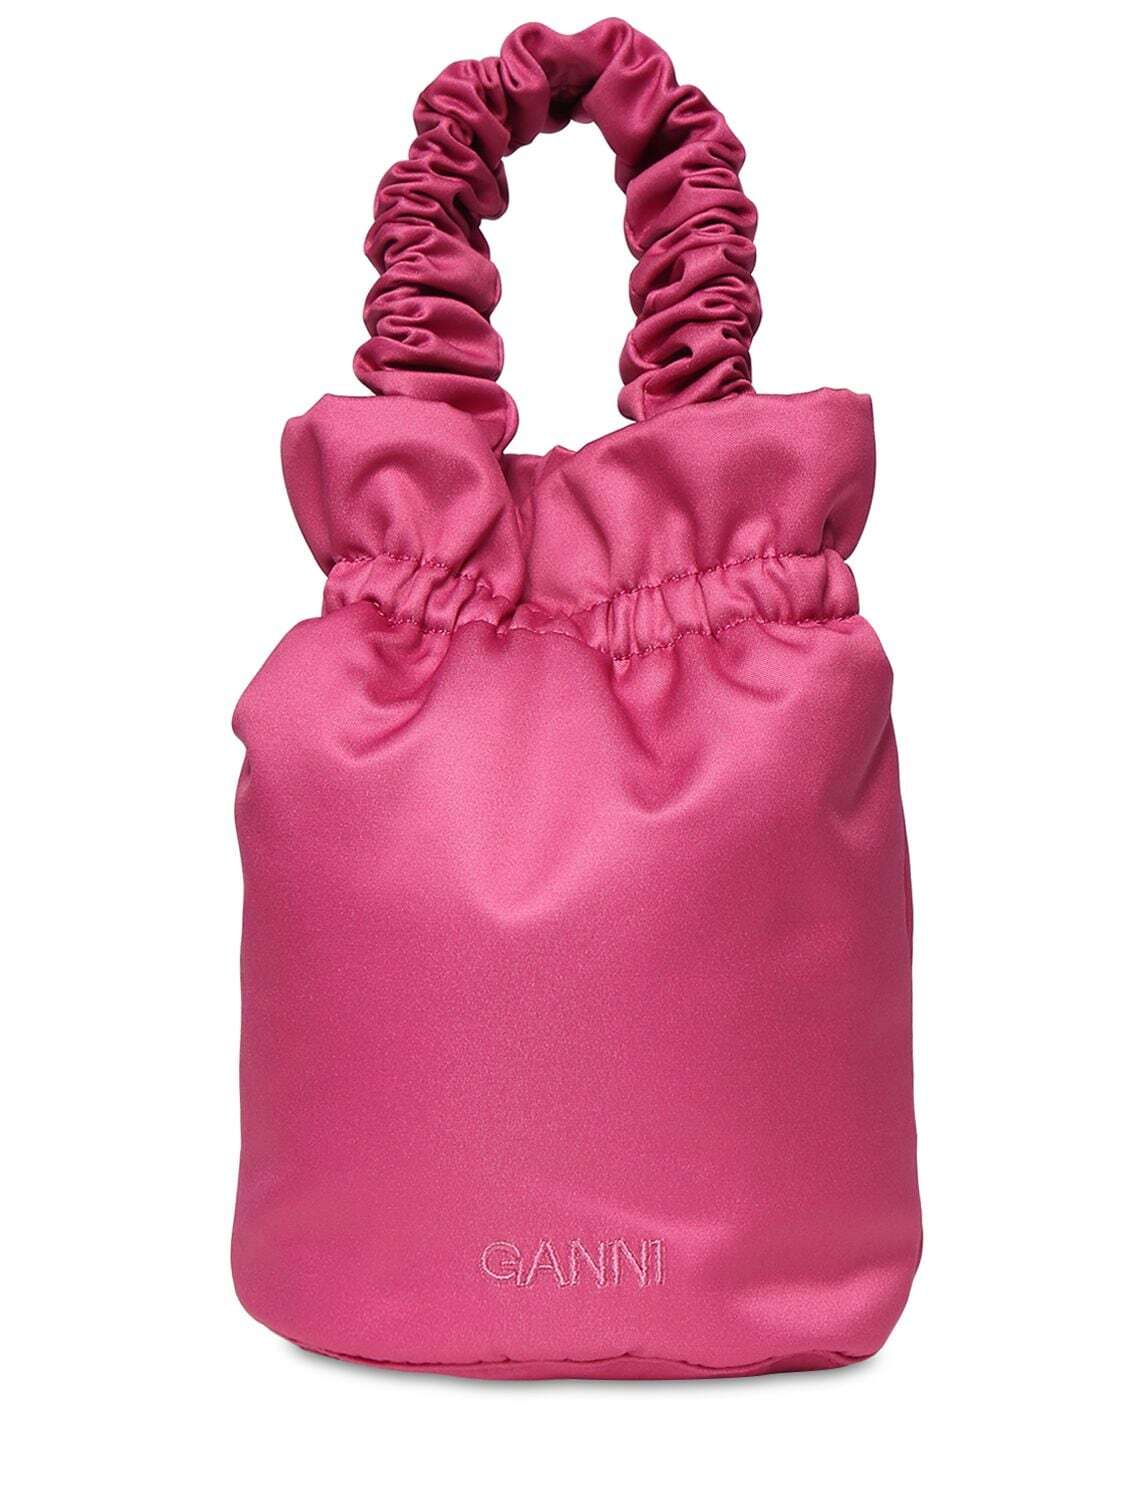 GANNI Occasion Ruched Recycled Tech Bag in pink